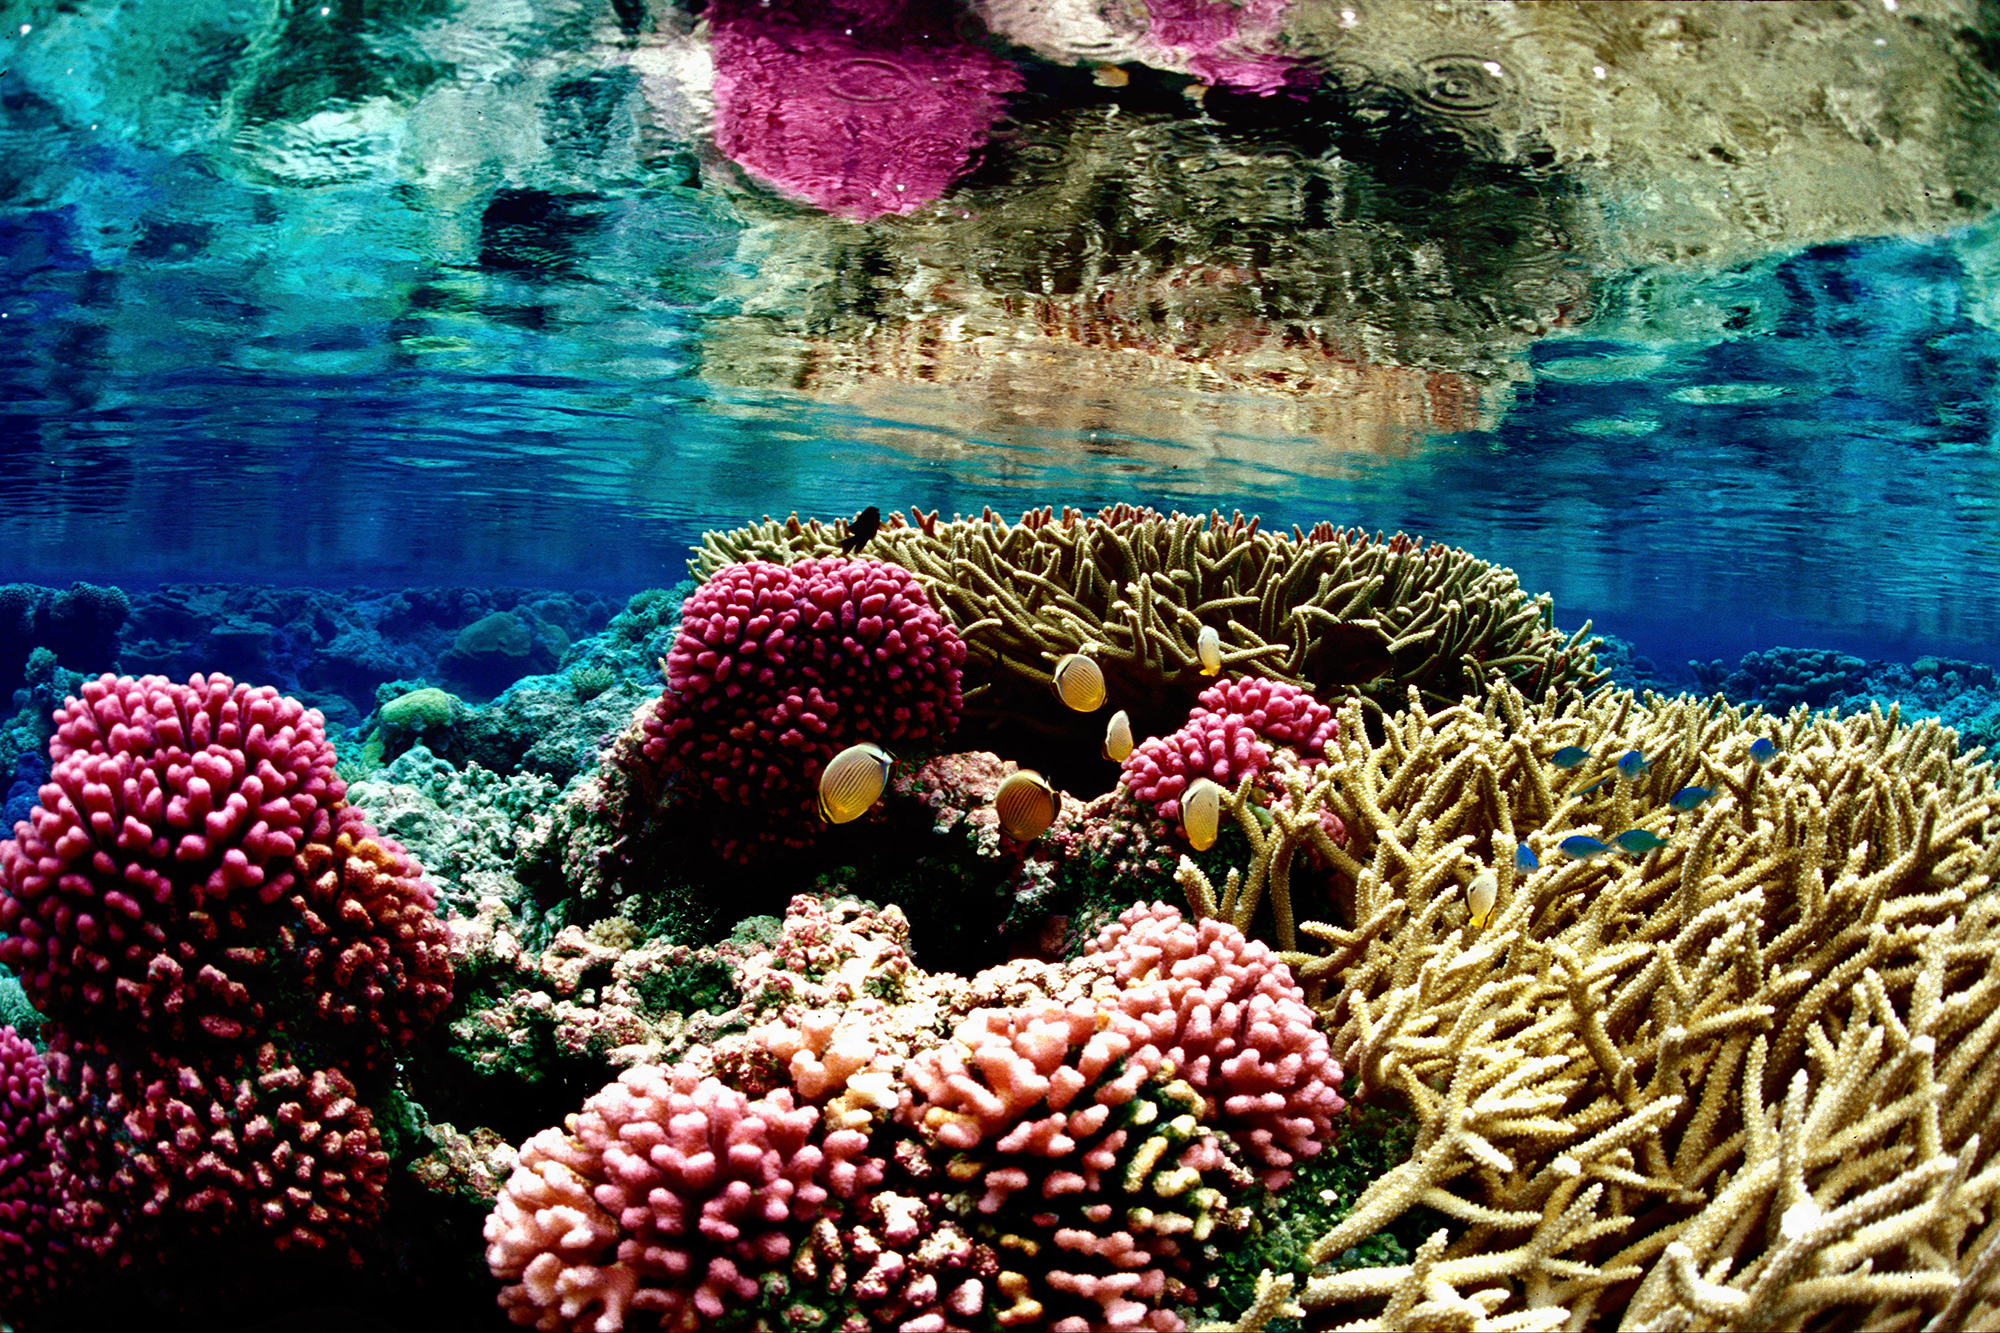 Can We Move Coral Reefs?